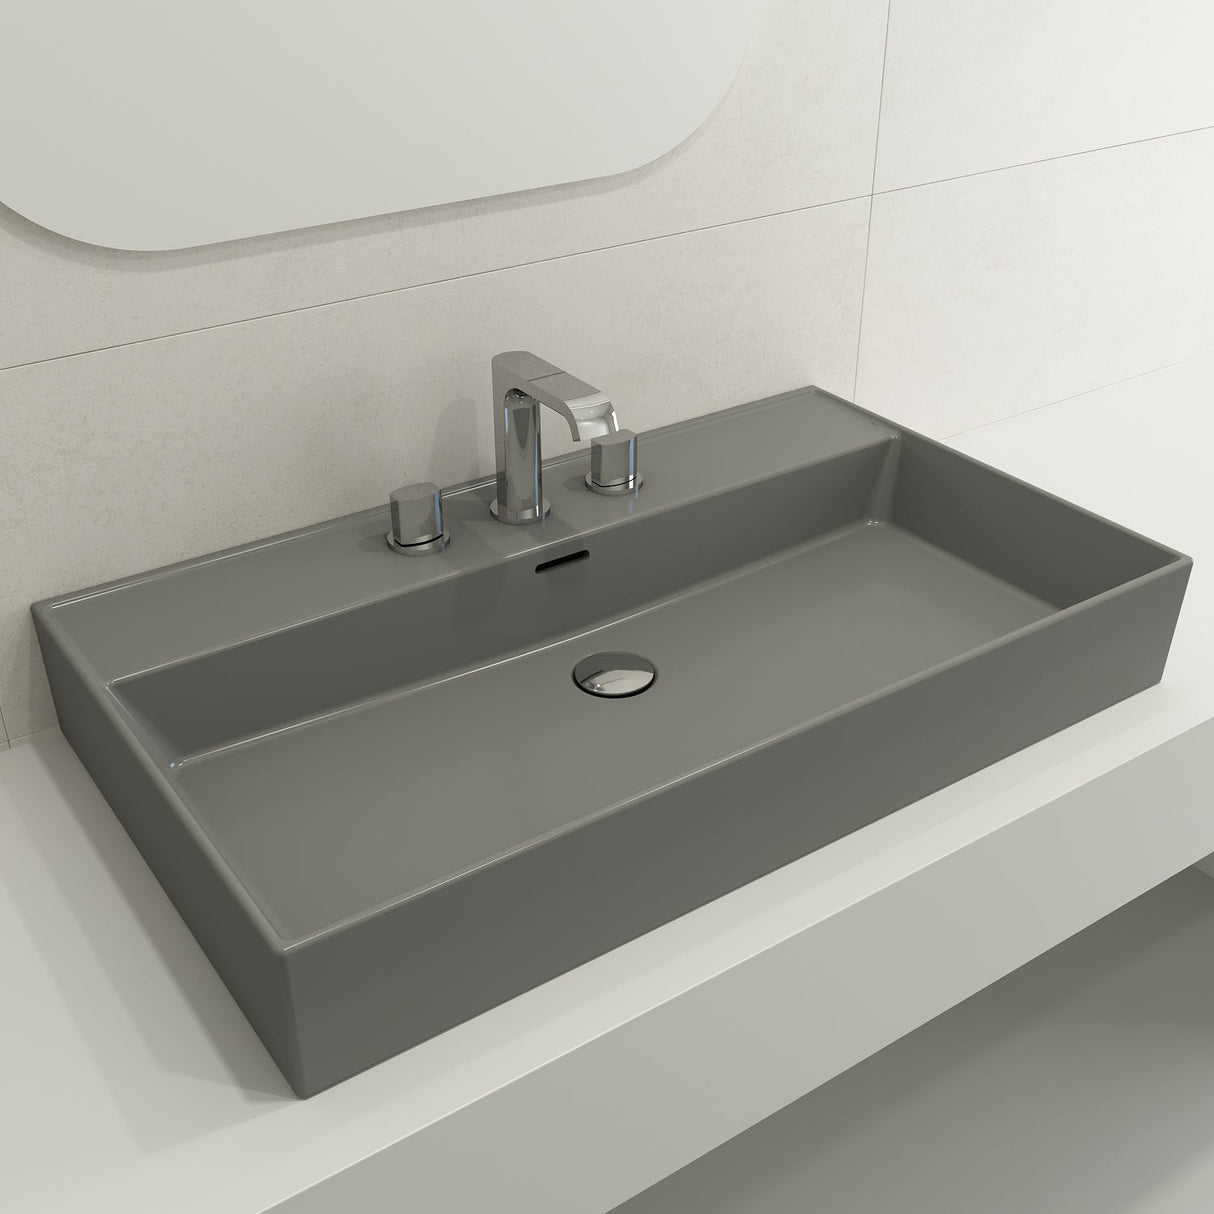 BOCCHI 1377-006-0127 Milano Wall-Mounted Sink Fireclay 32 in. 3-Hole with Overflow in Matte Gray